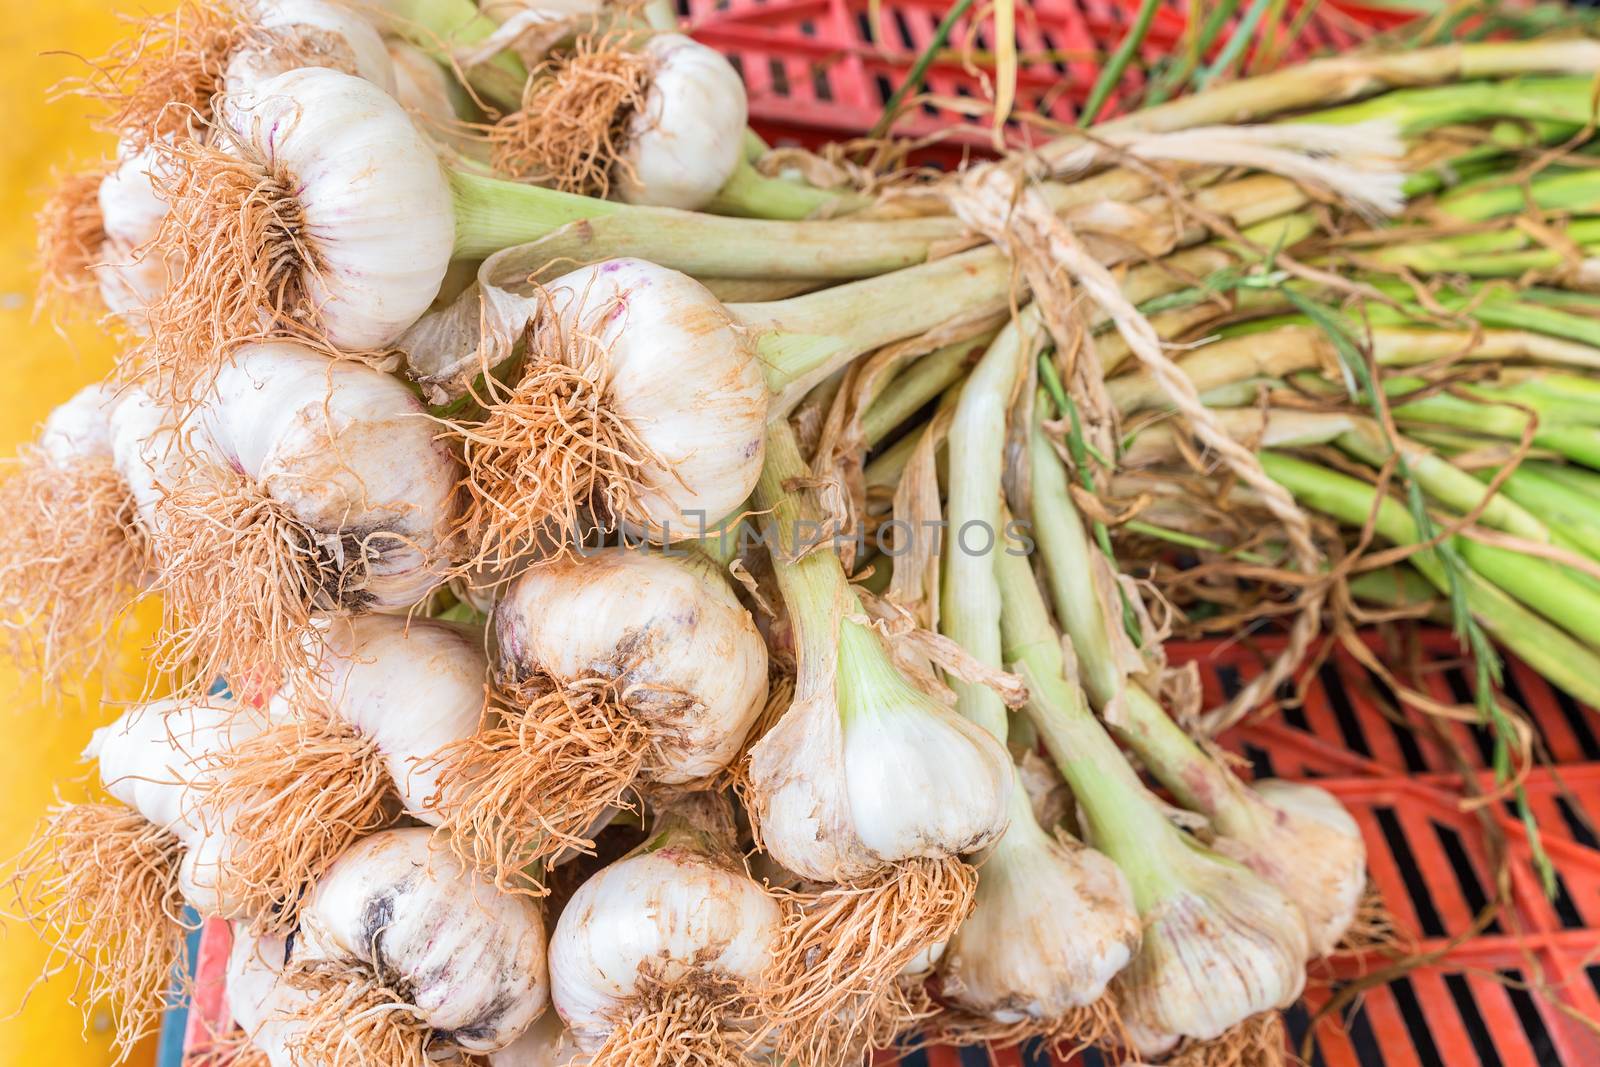 Bunch of garlic bulbs with stems by BenSchonewille